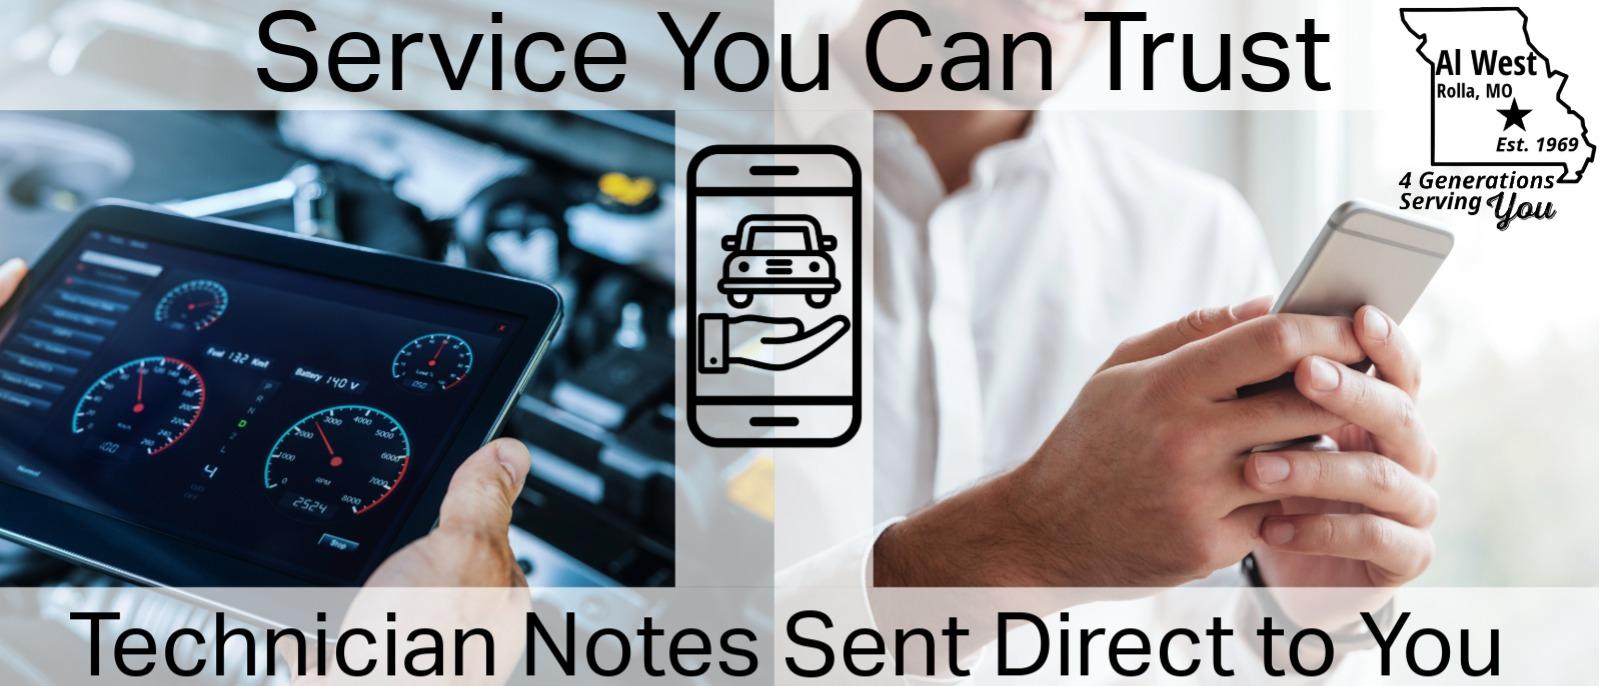 Service You Can Trust, Technician notes sent direct to you